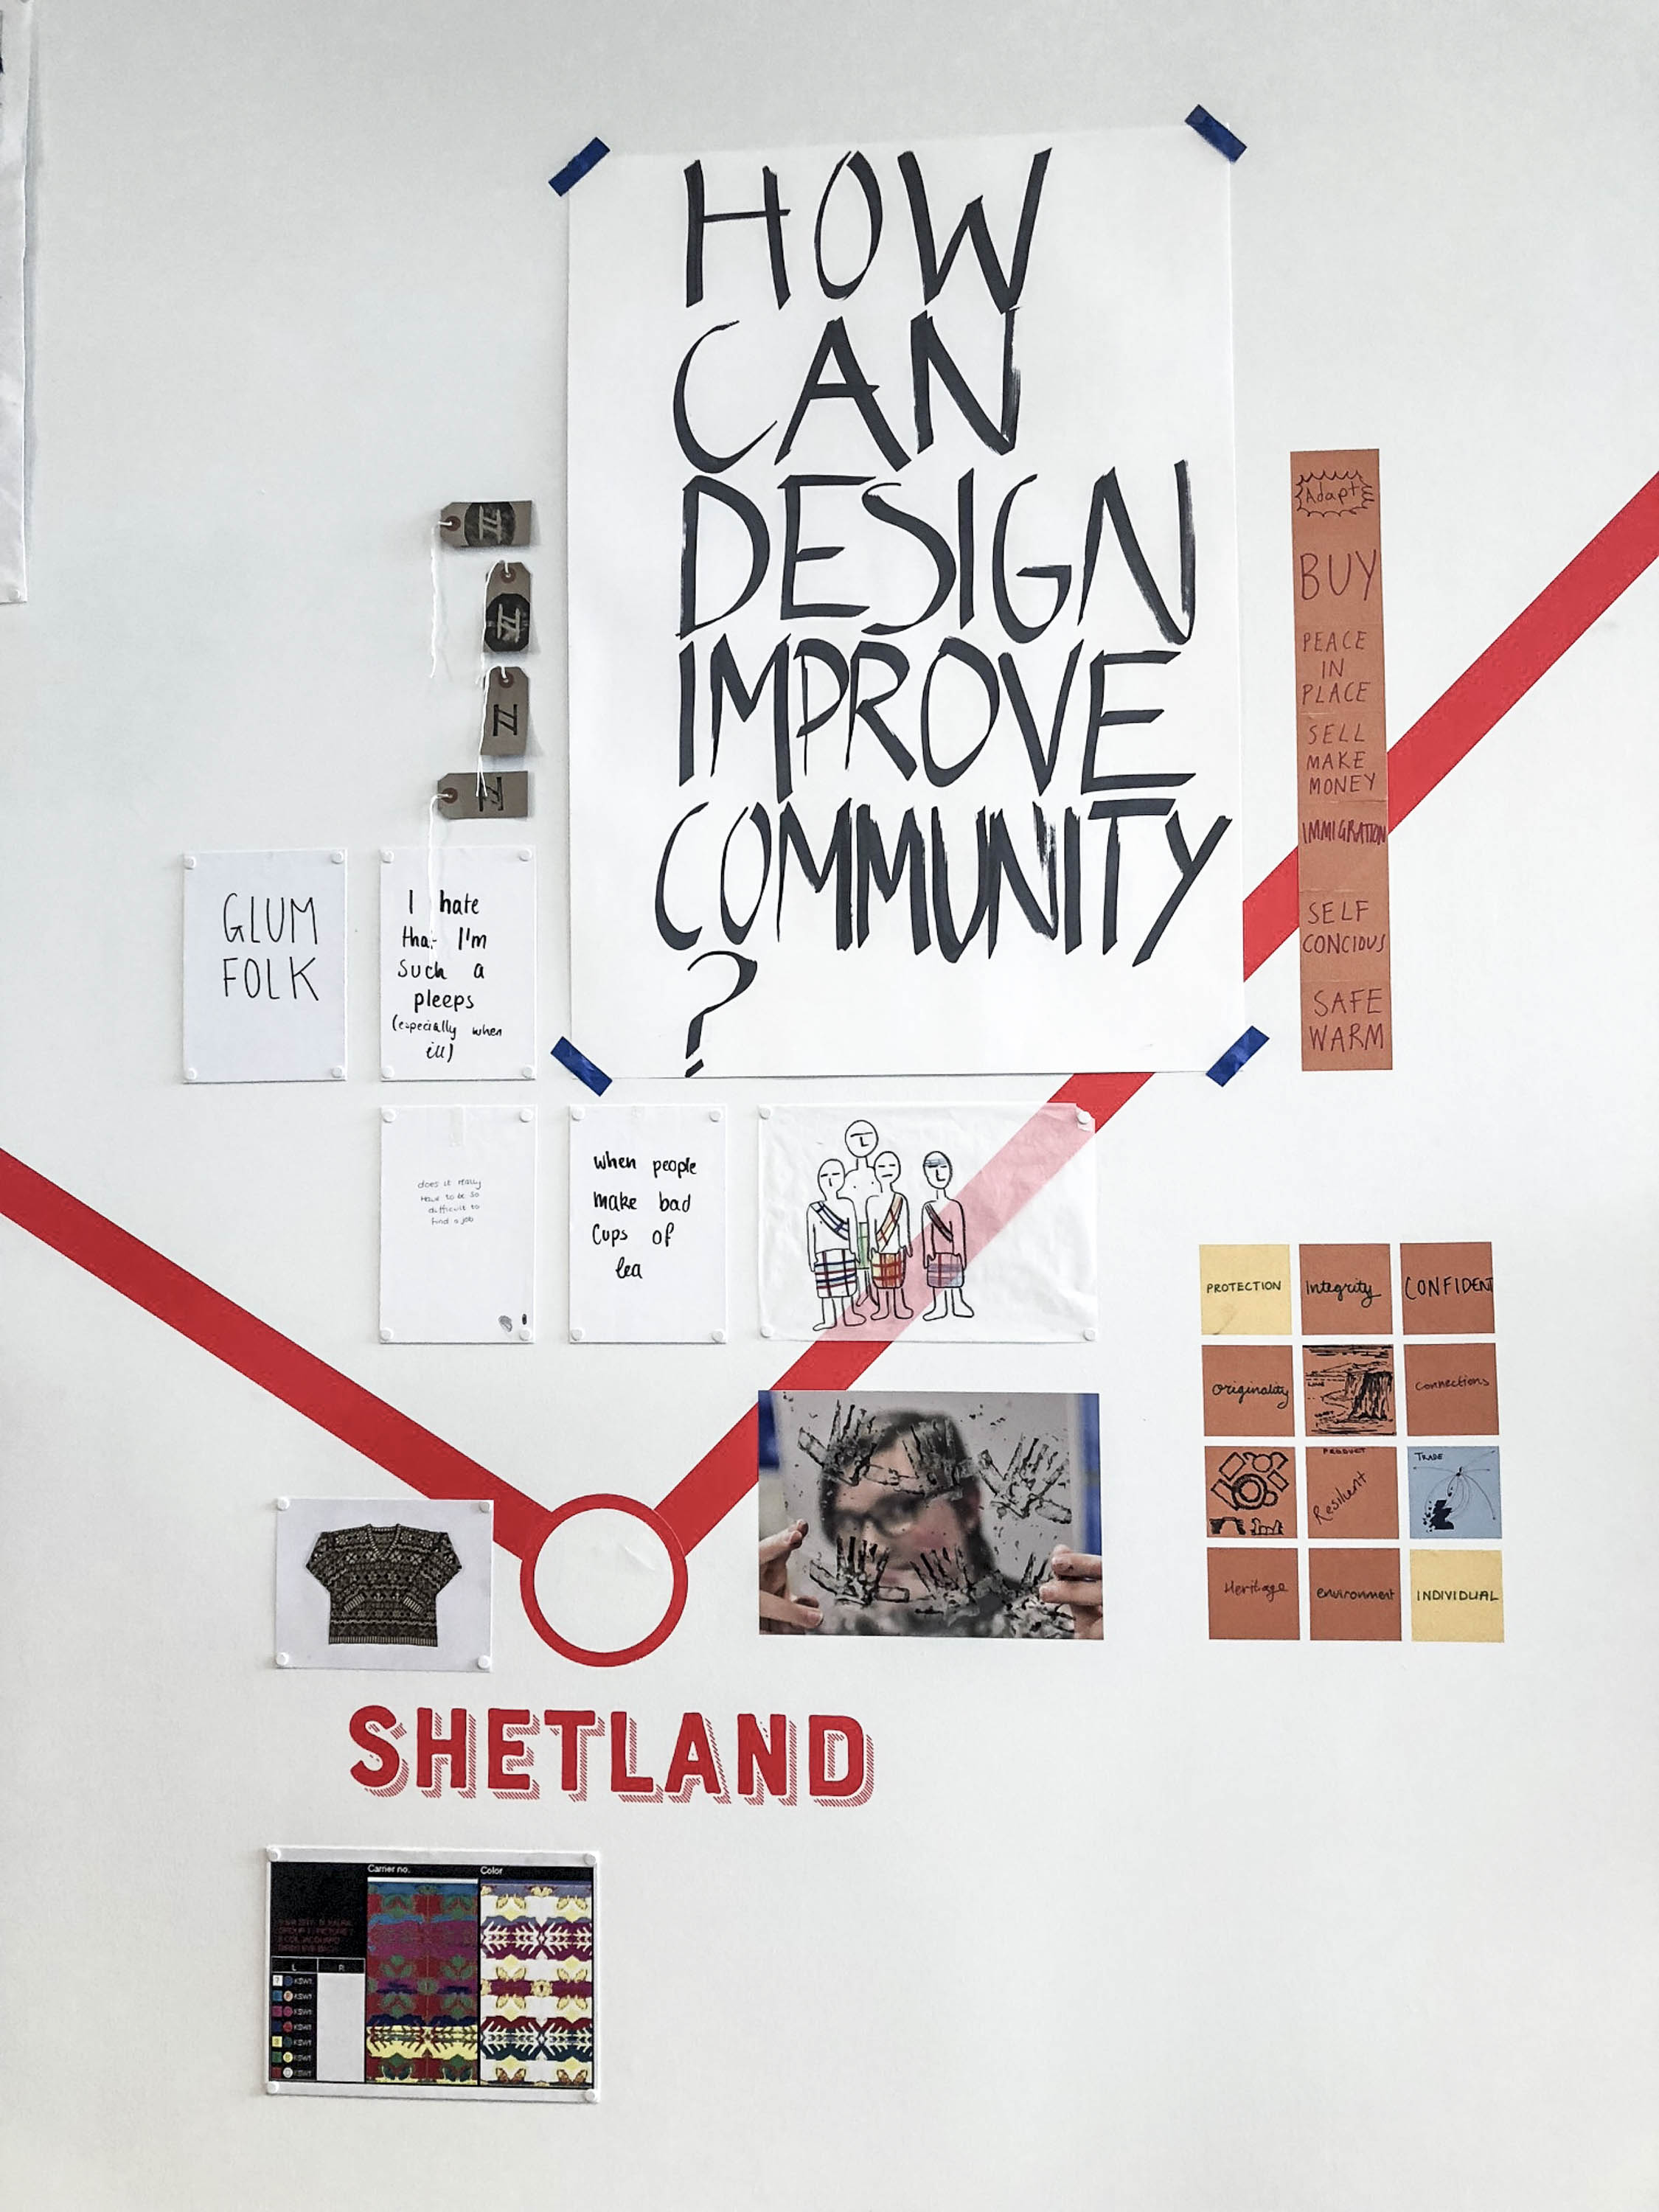 Shetland exibit at V&A Dundee, for the Scottish Design Relay - Poster says "How can design improve community"